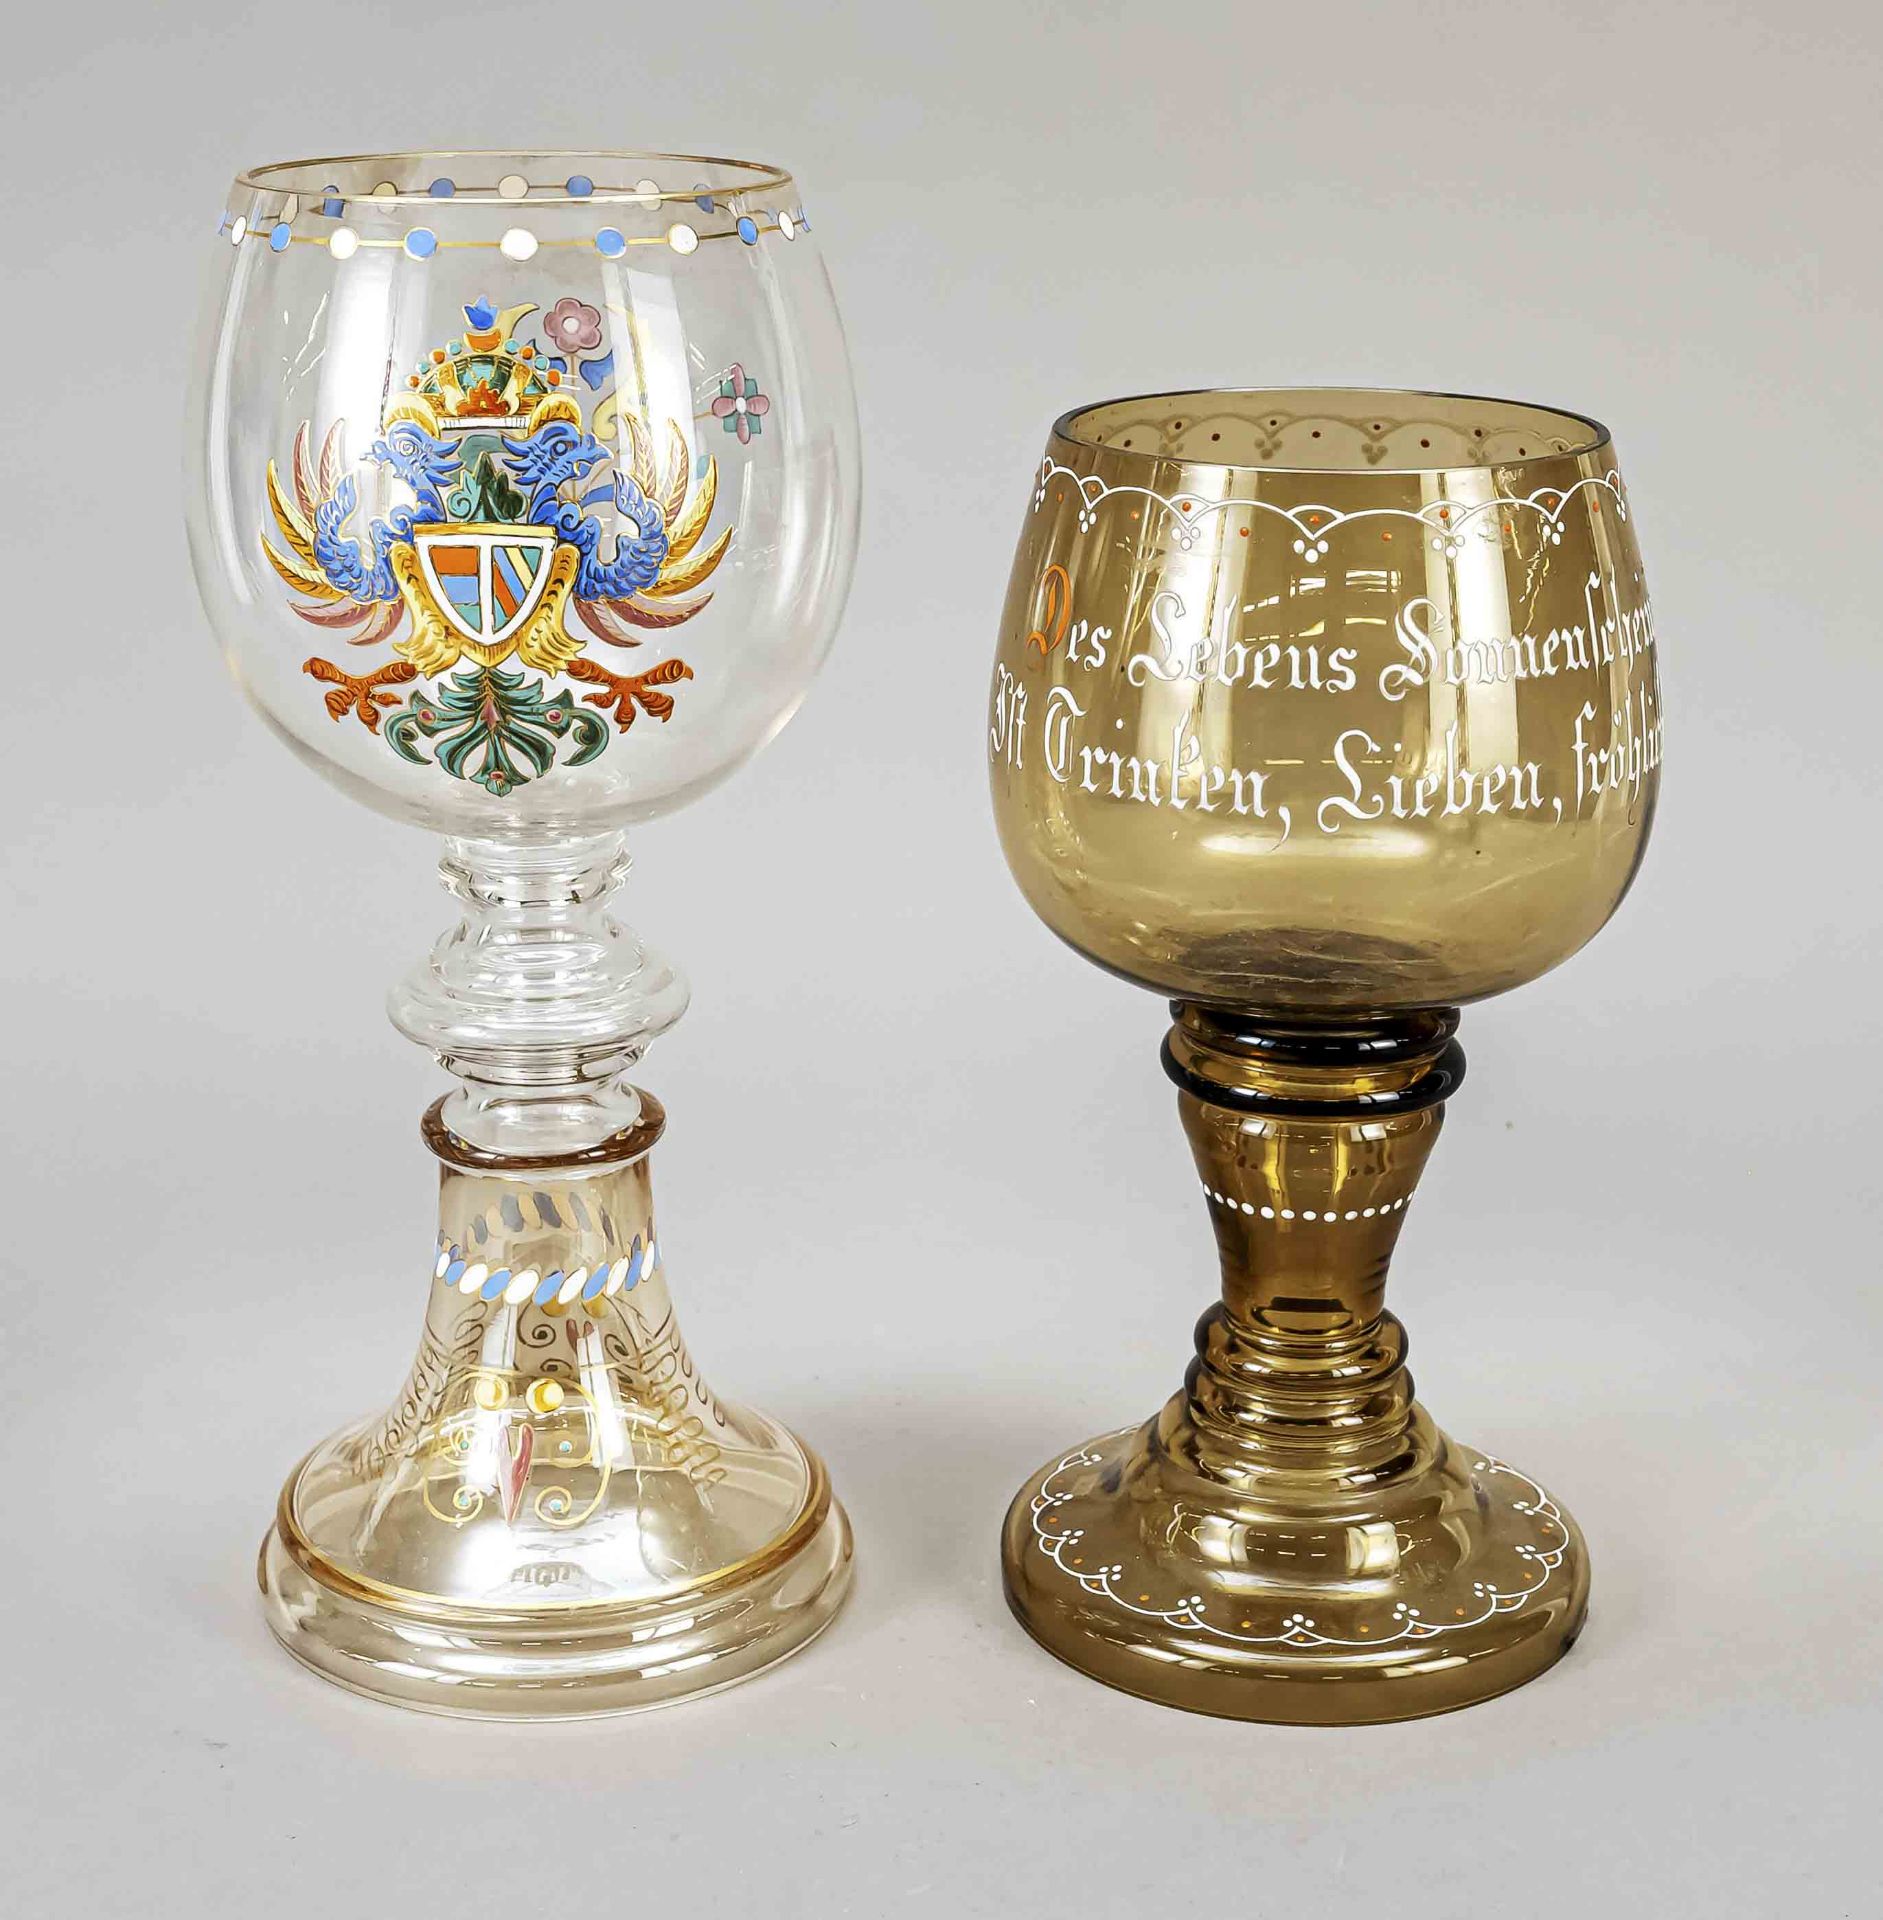 Two very large showpiece goblets, around 1900, each with round vaulted stand, jointed stem and